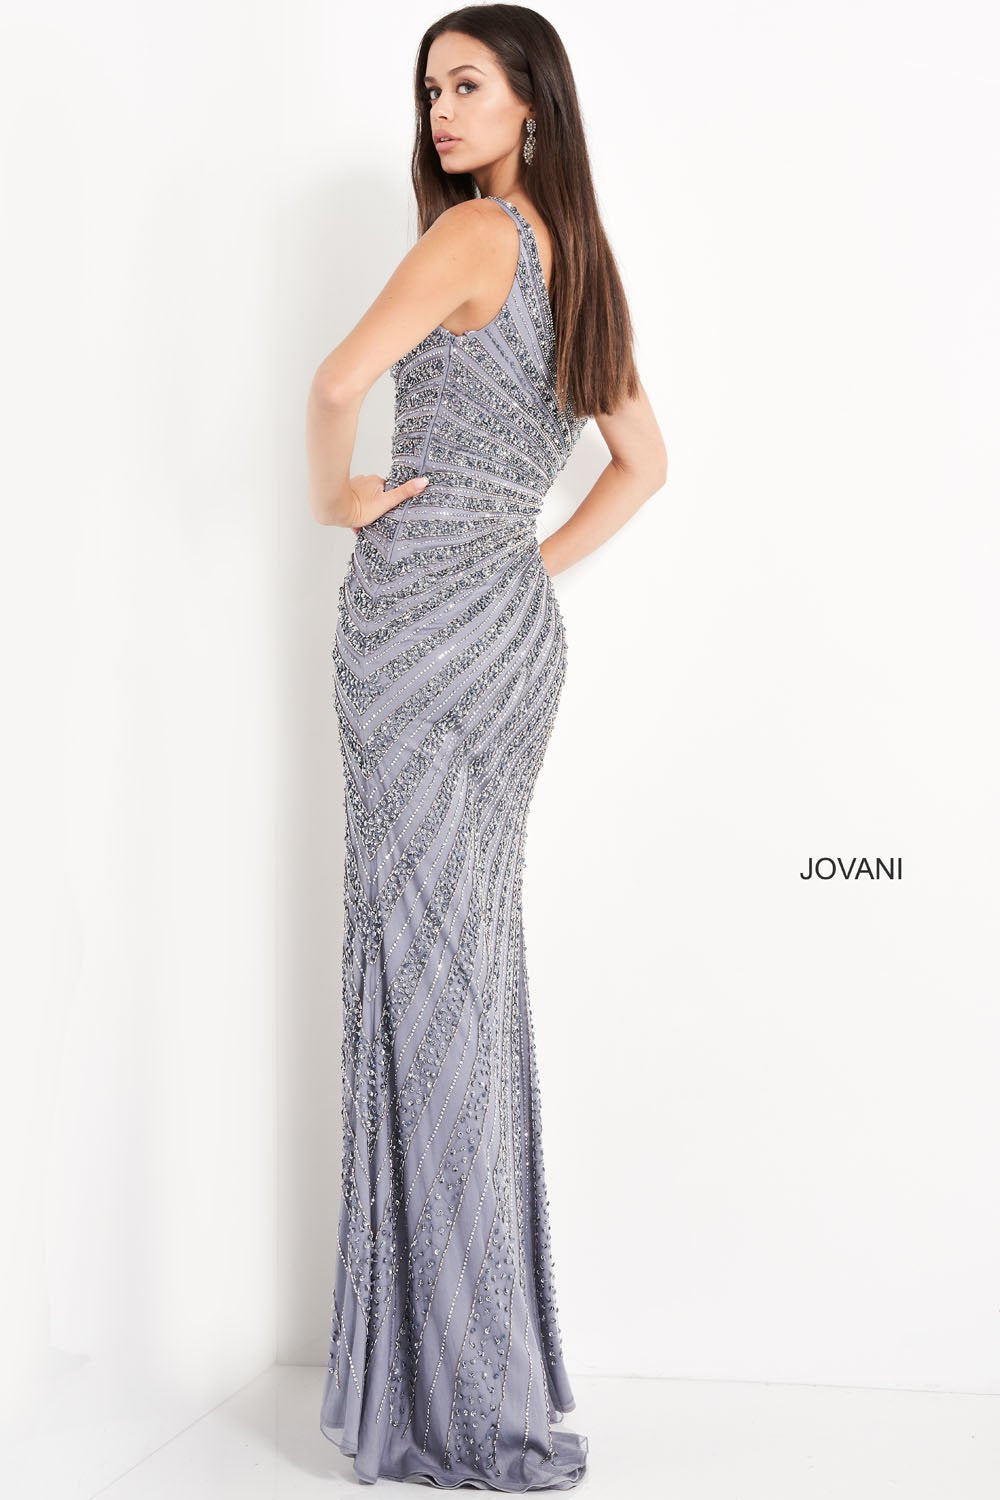 Jovani 04539 dress images in these colors: Smoke.